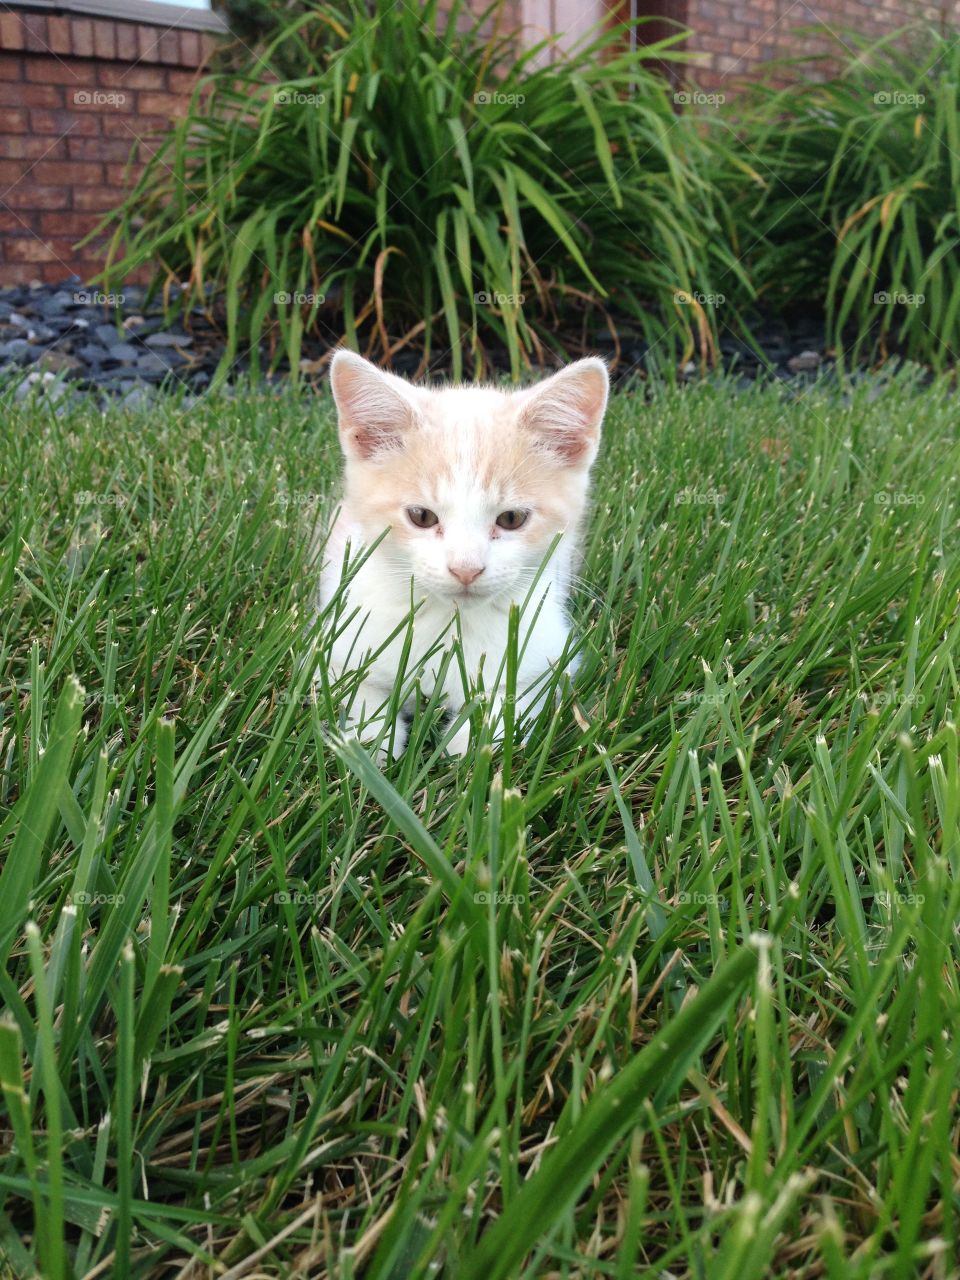 Prowling in the Grass. Our fluffball of a kitten prowling around outside in the grass